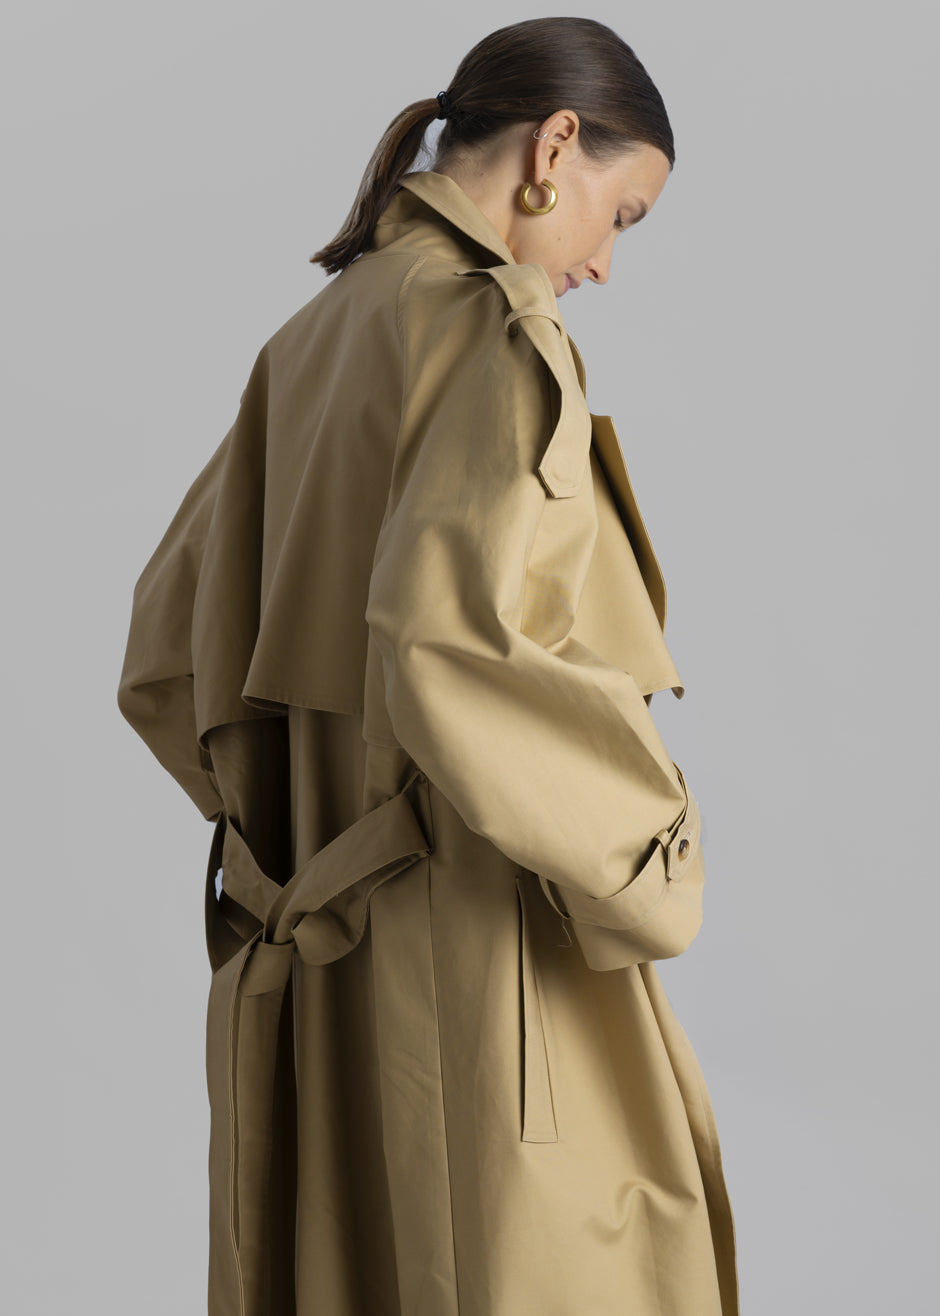 Suzanne Trench Coat - Beige - 1